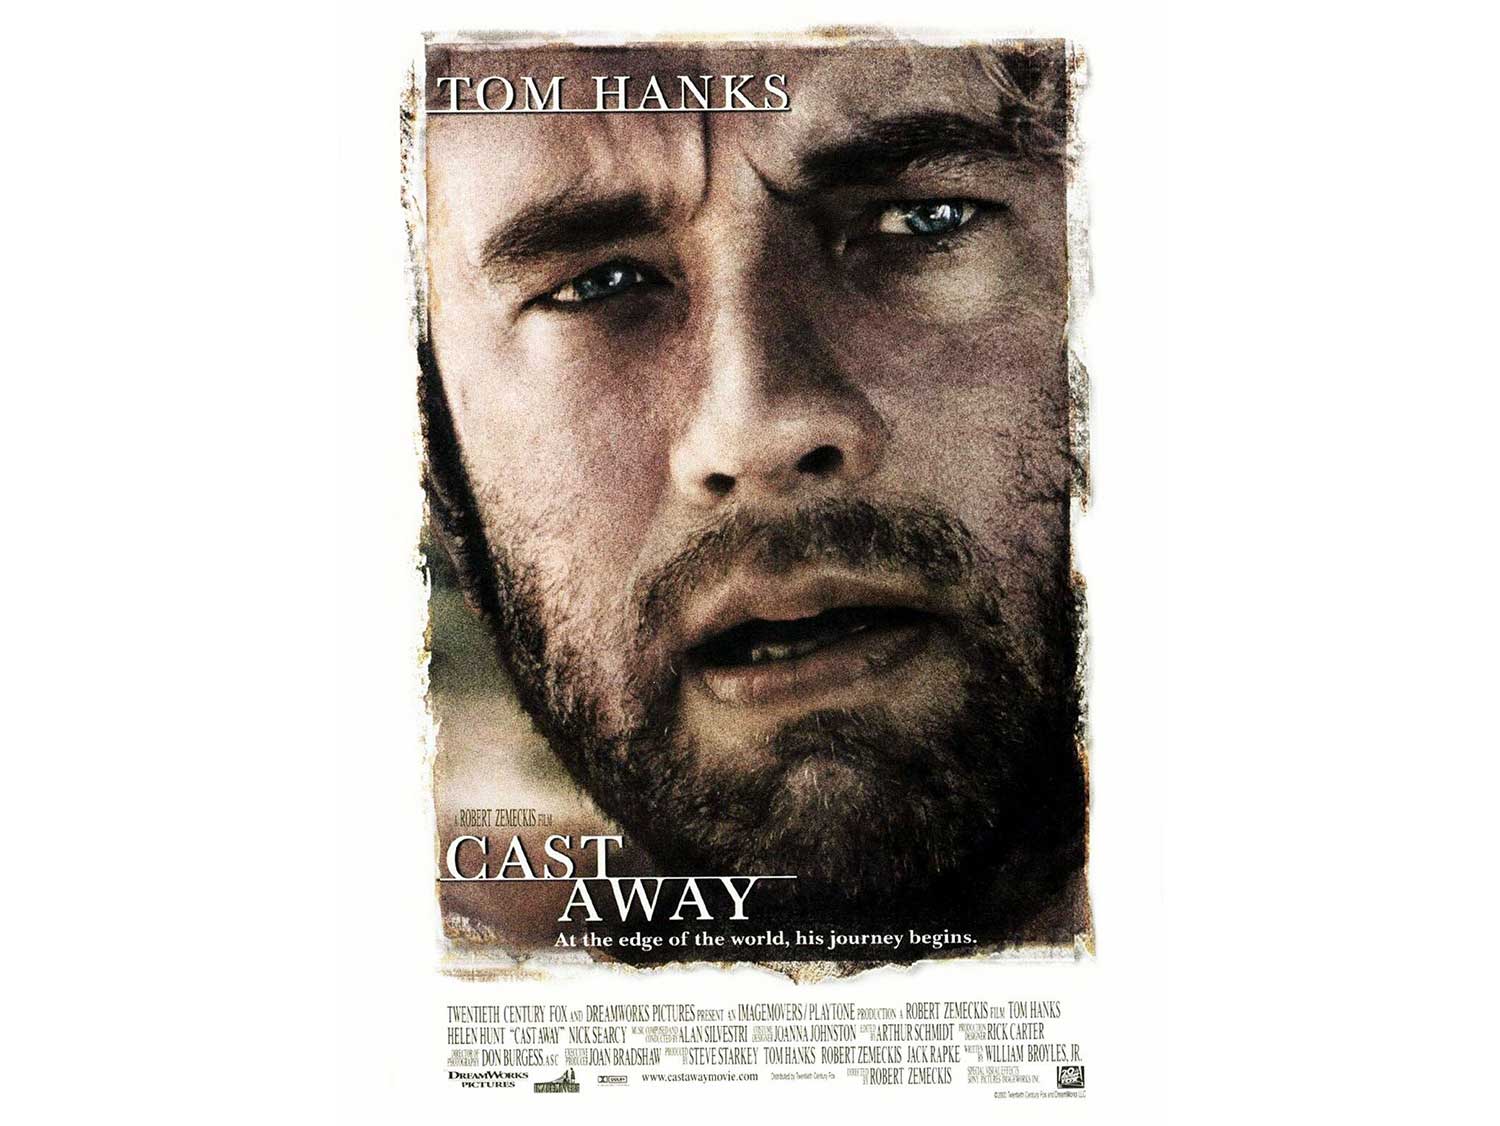 the movie cover of castaway